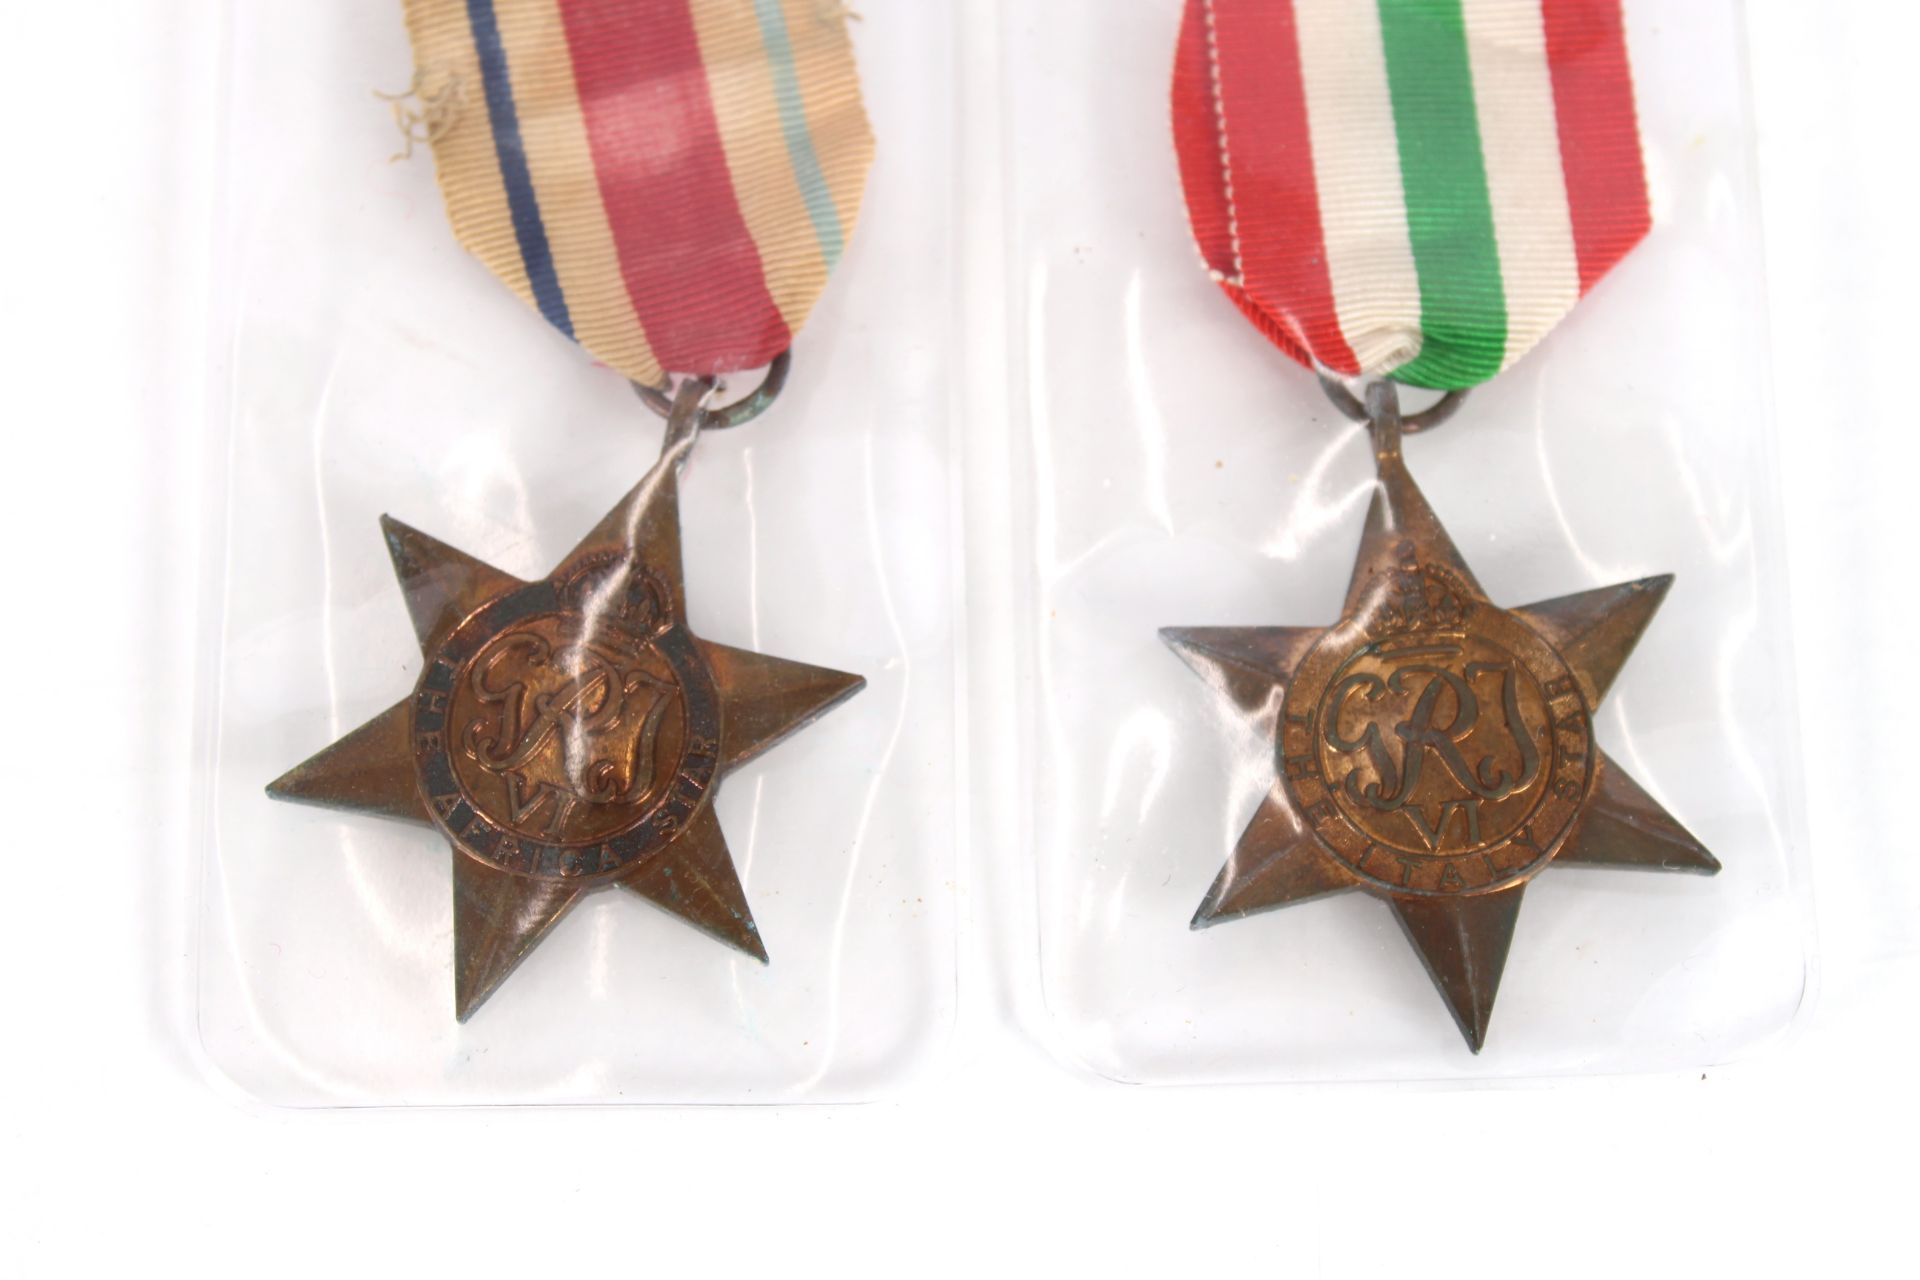 Six WWII medals including Italy and 39/45 Stars - Image 6 of 7